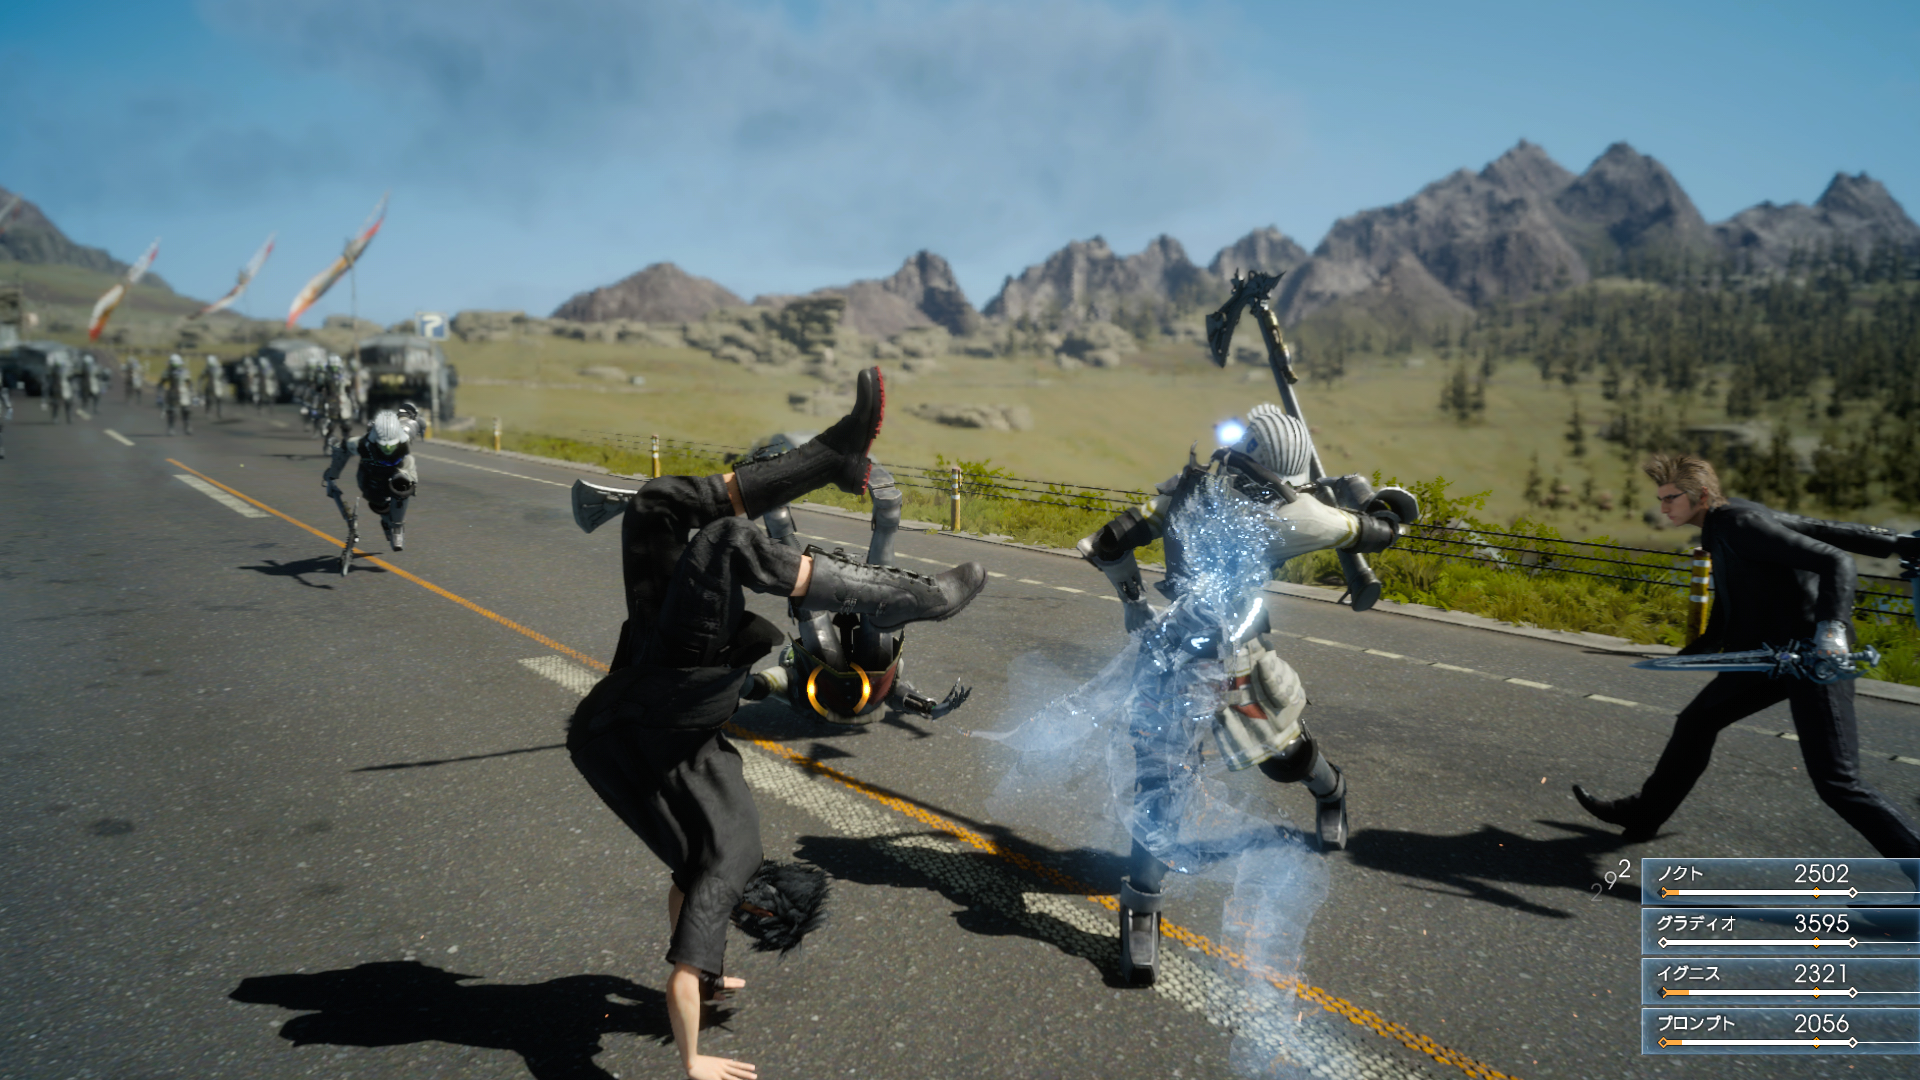 Final fantasy 15 update cannot download free